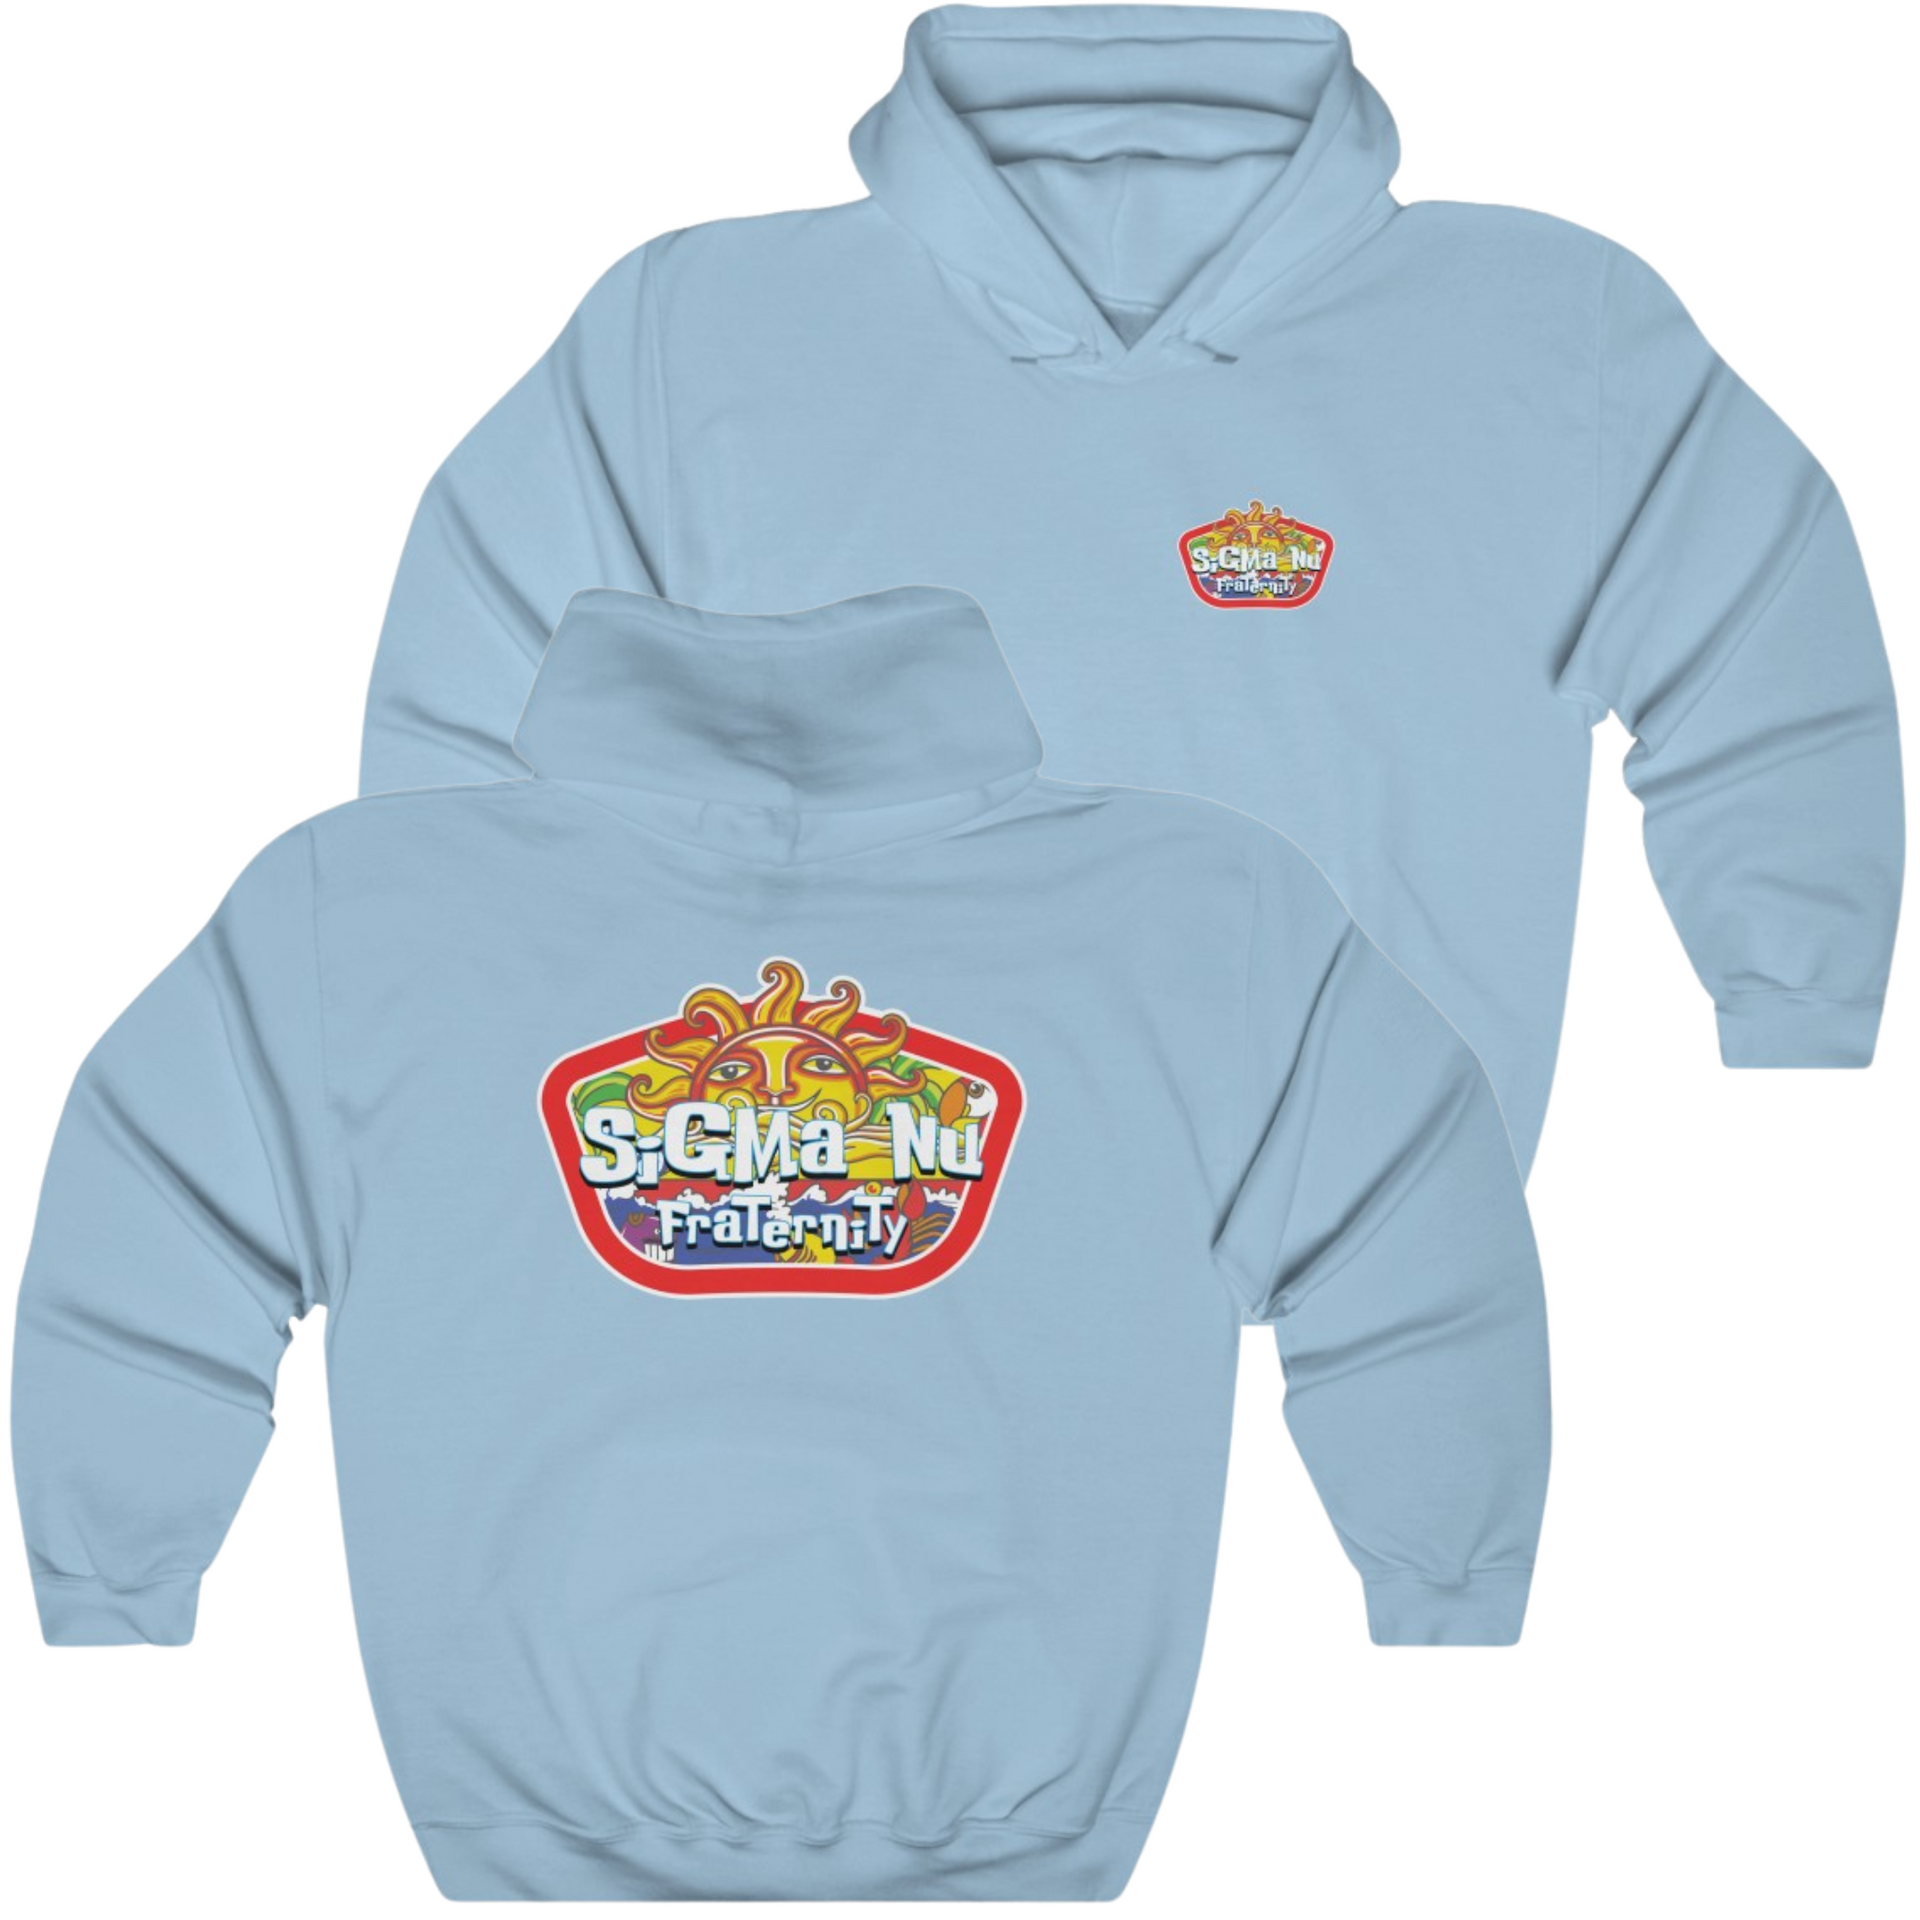 Light Blue Sigma Nu Graphic Hoodie | Summer Sol | Sigma Nu Clothing, Apparel and Merchandise 